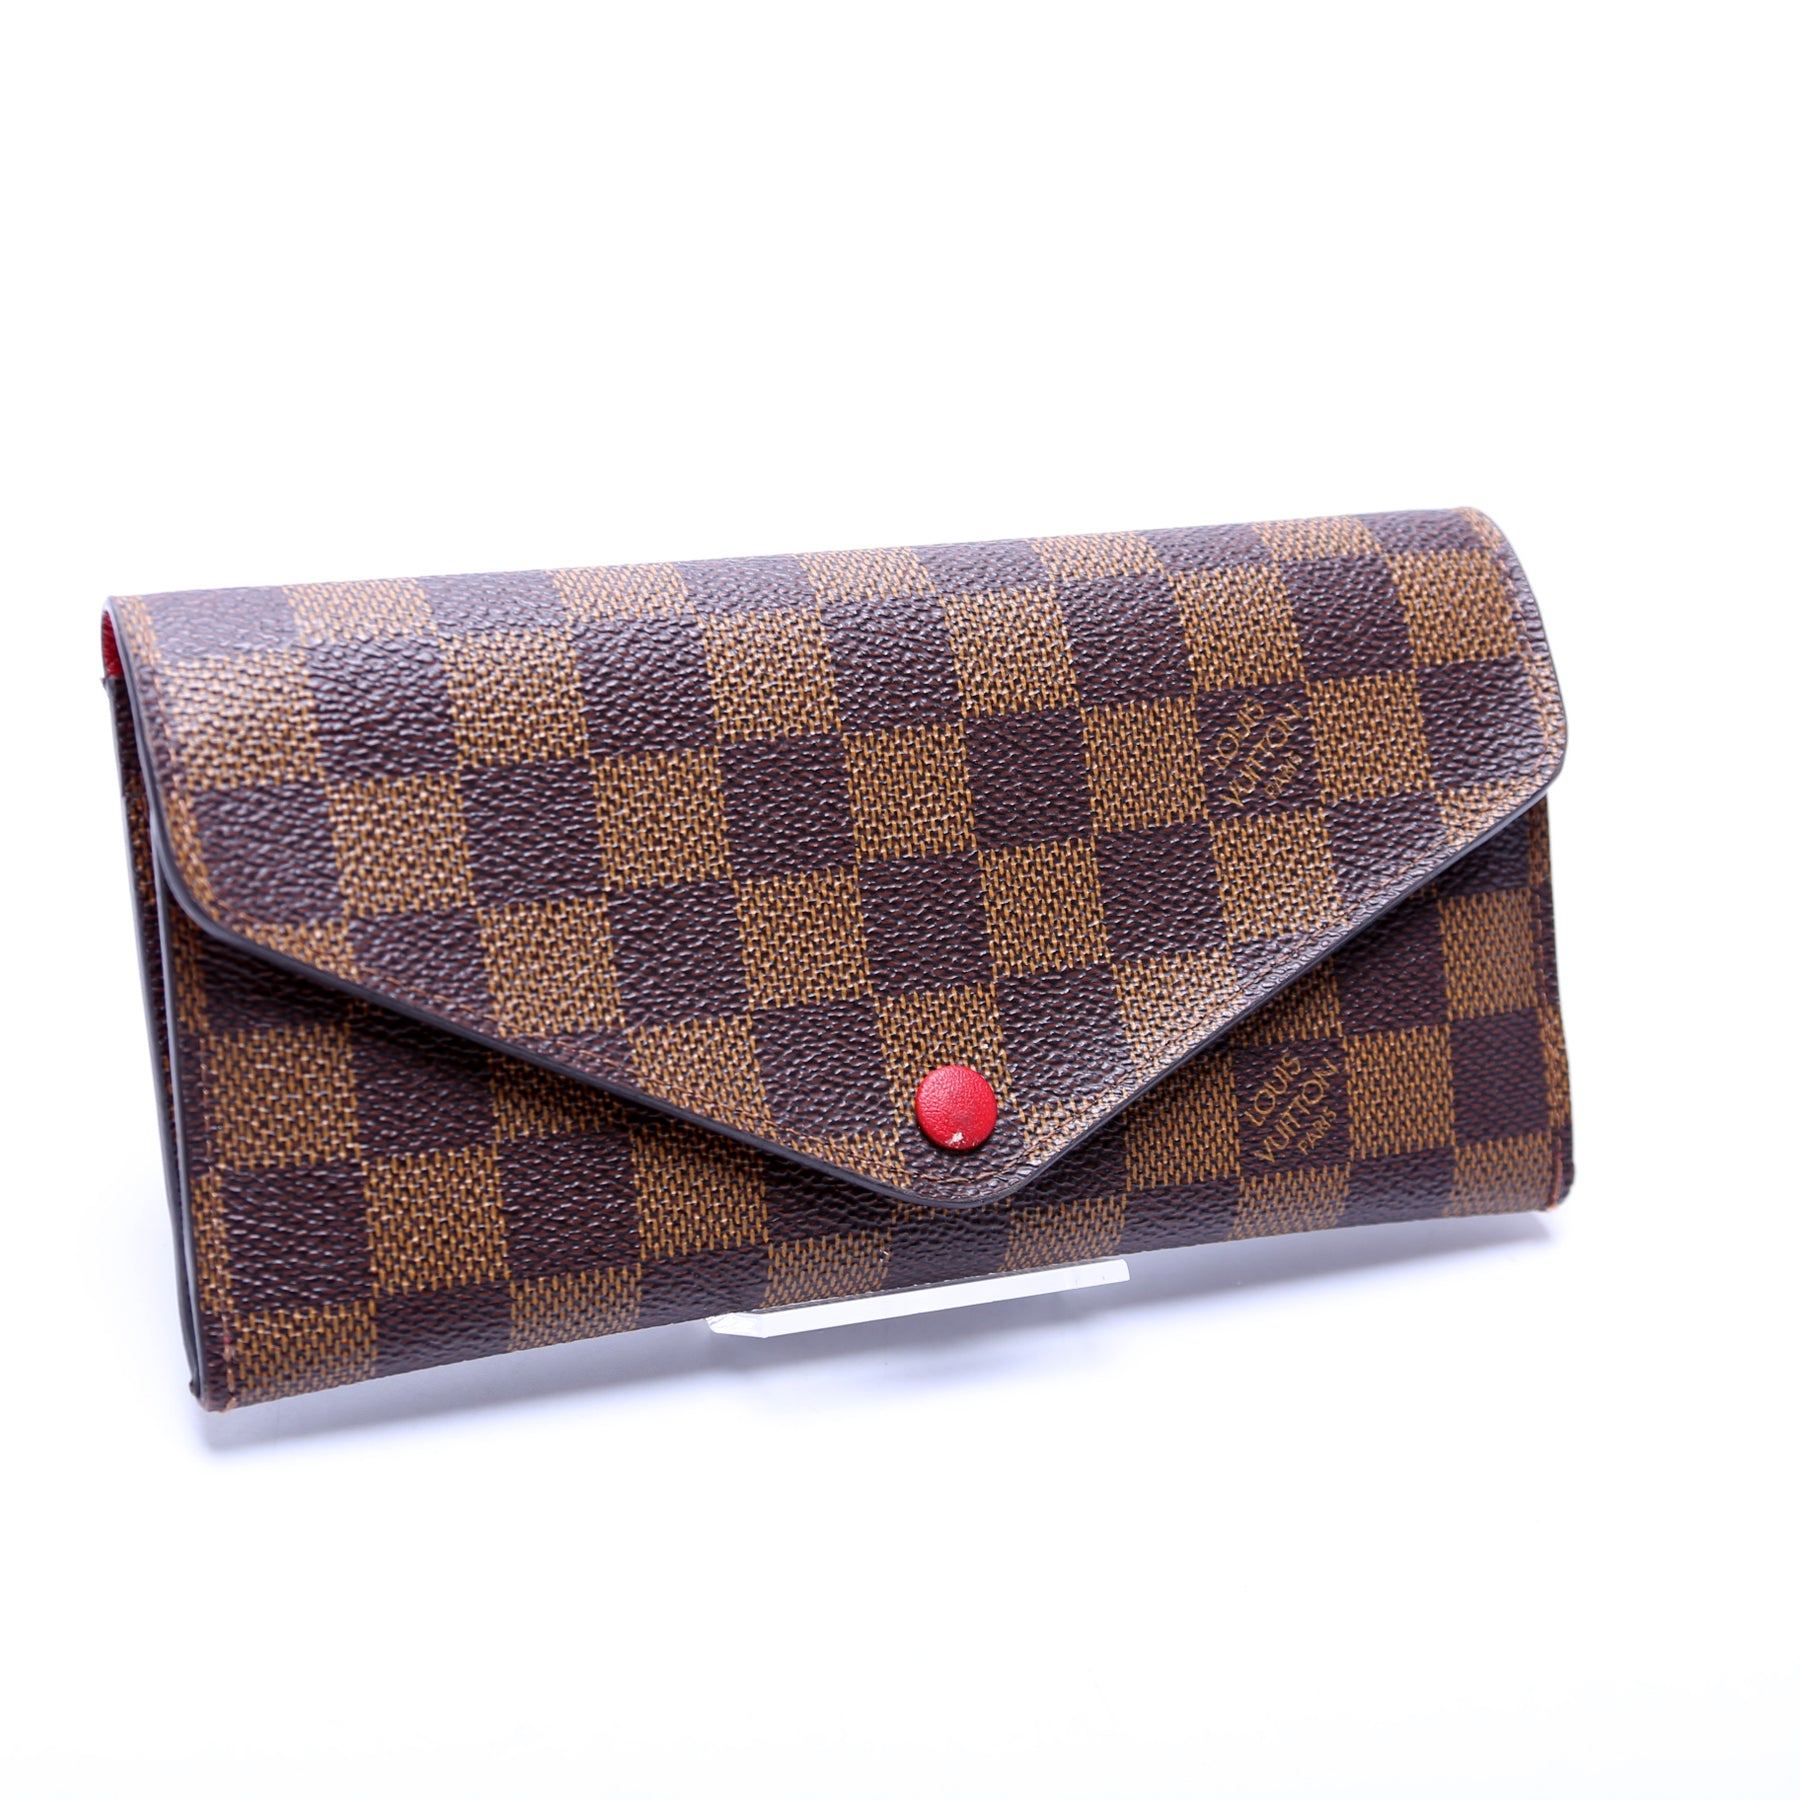 Used Louis Vuitton josephine wallet - LEATHER